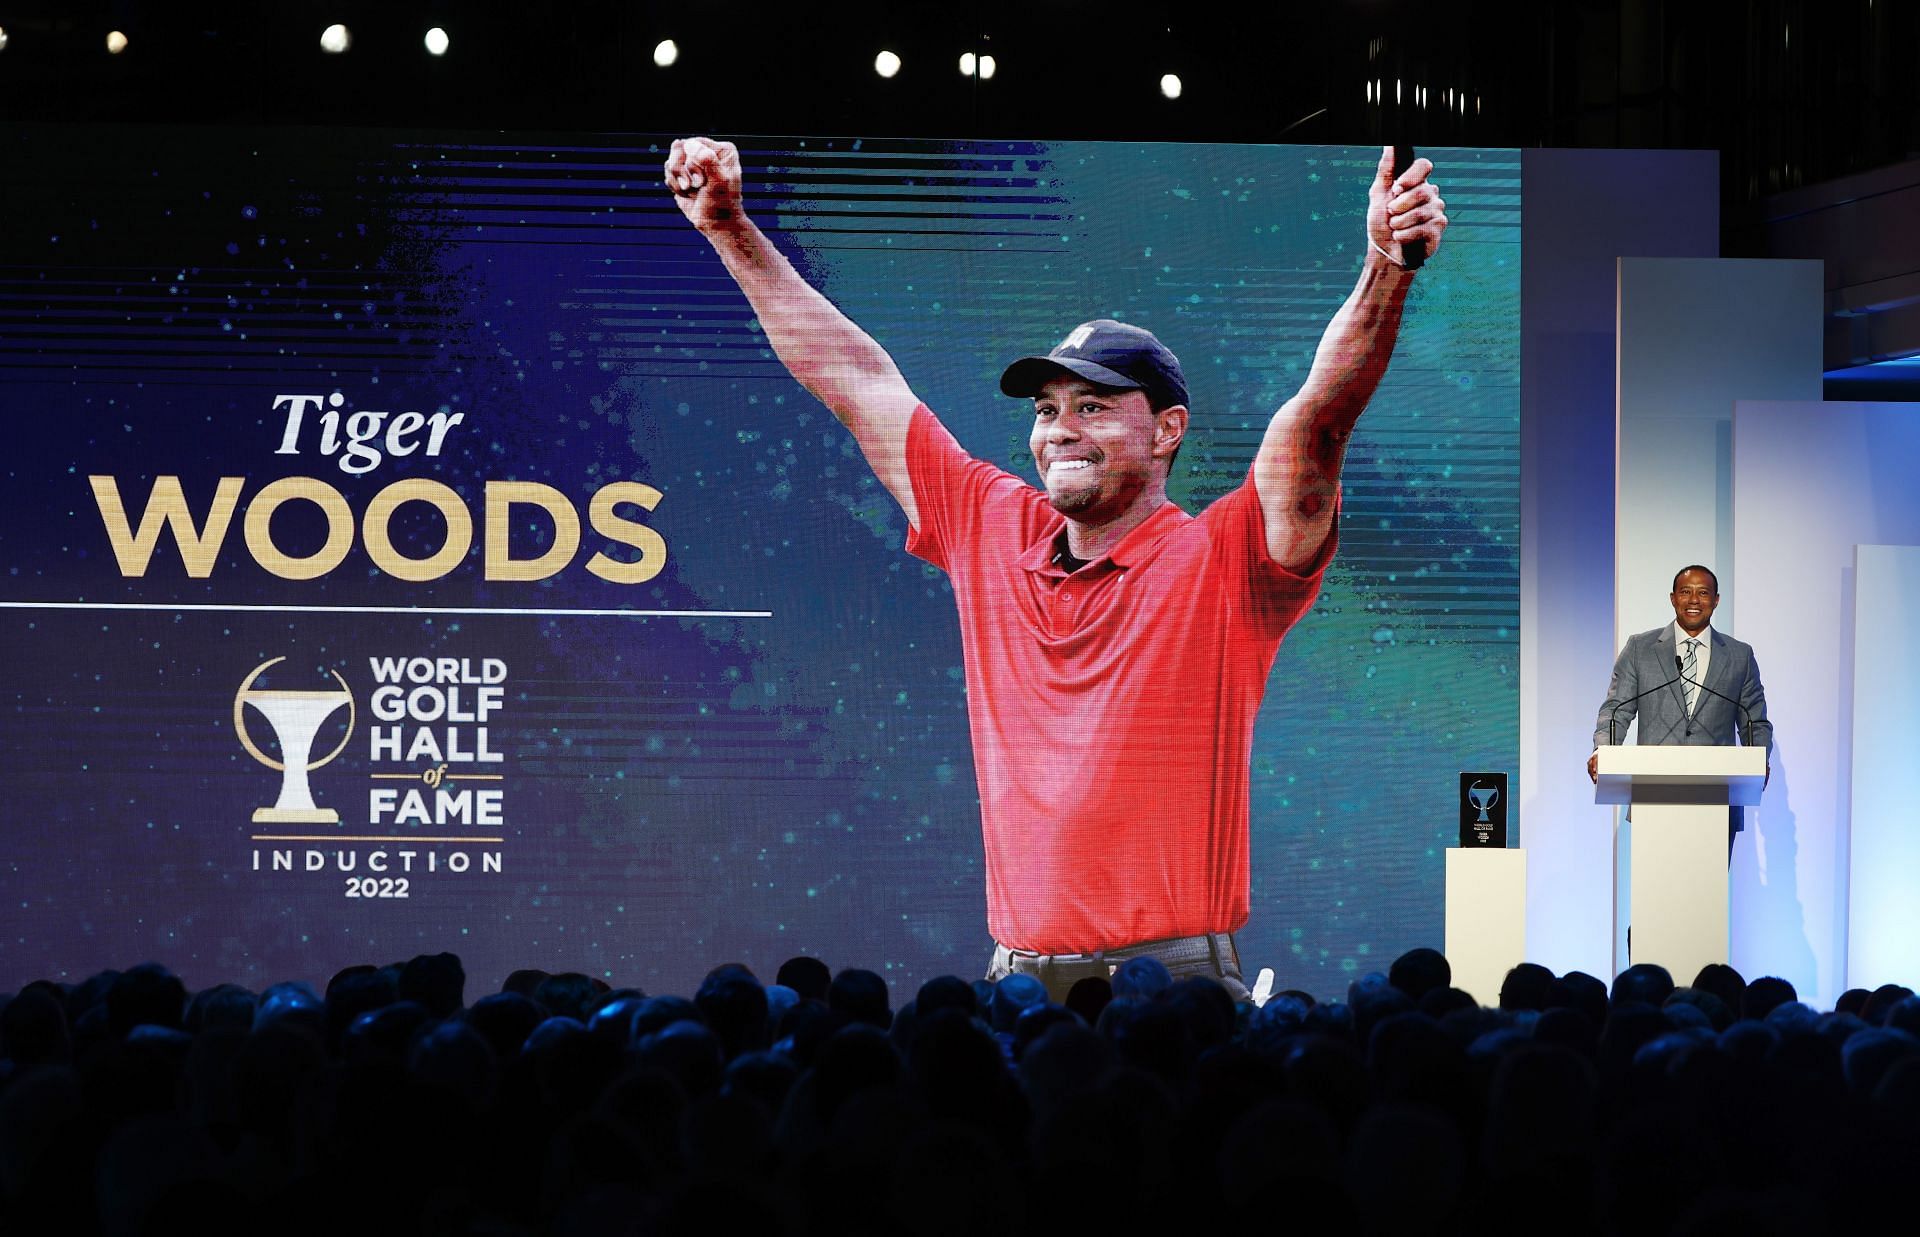 2022 World Golf Hall of Fame Induction